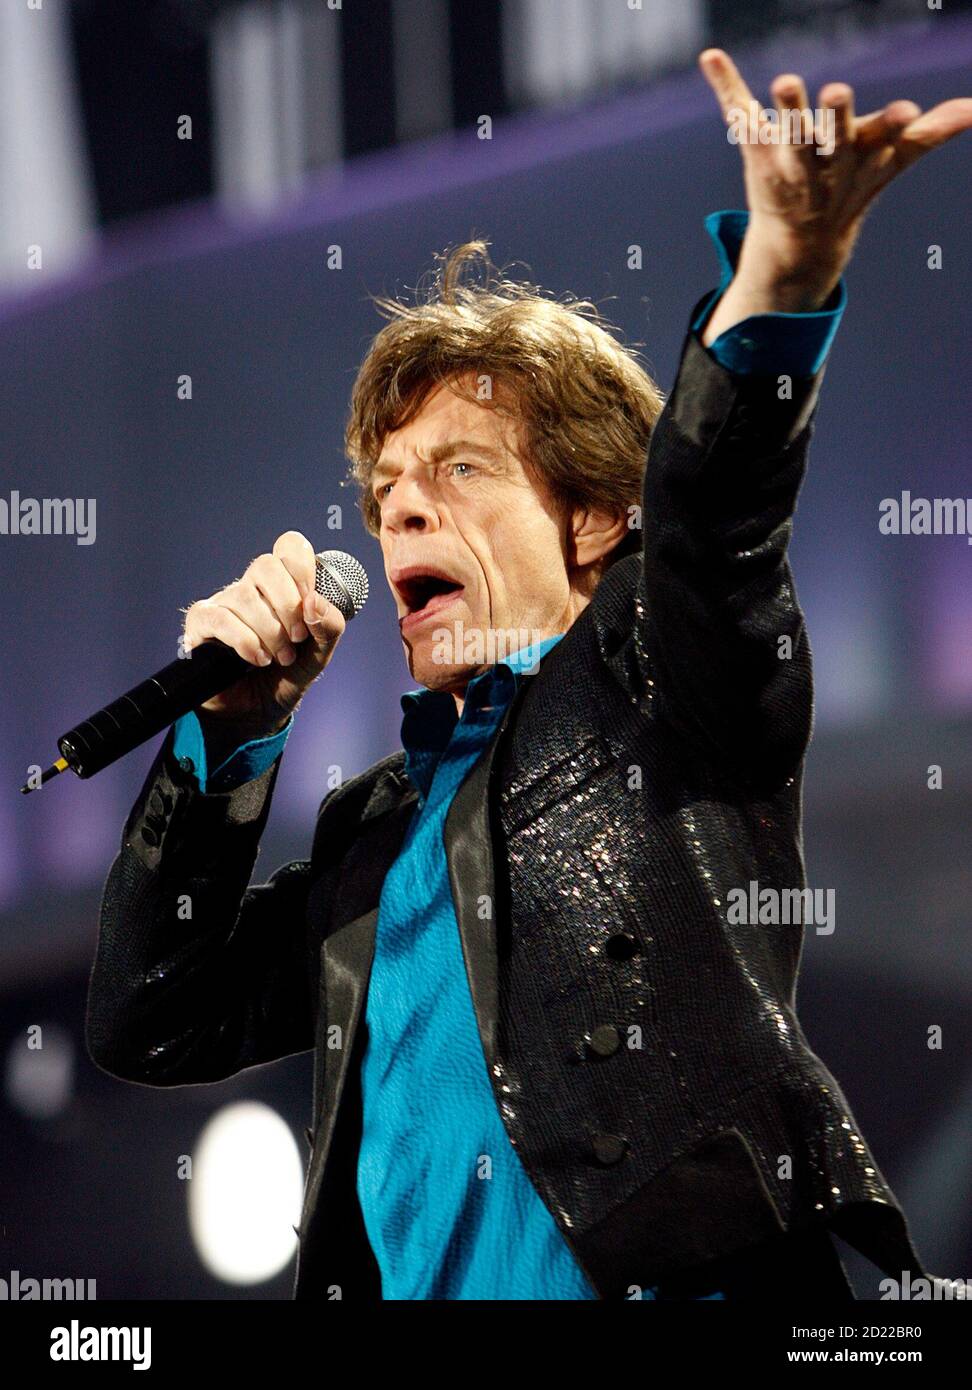 Rolling Stones lead singer Mick Jagger performs during the band's "A Bigger  Bang" European tour stop in Lausanne August 11, 2007. REUTERS/Denis  Balibouse (SWITZERLAND Stock Photo - Alamy